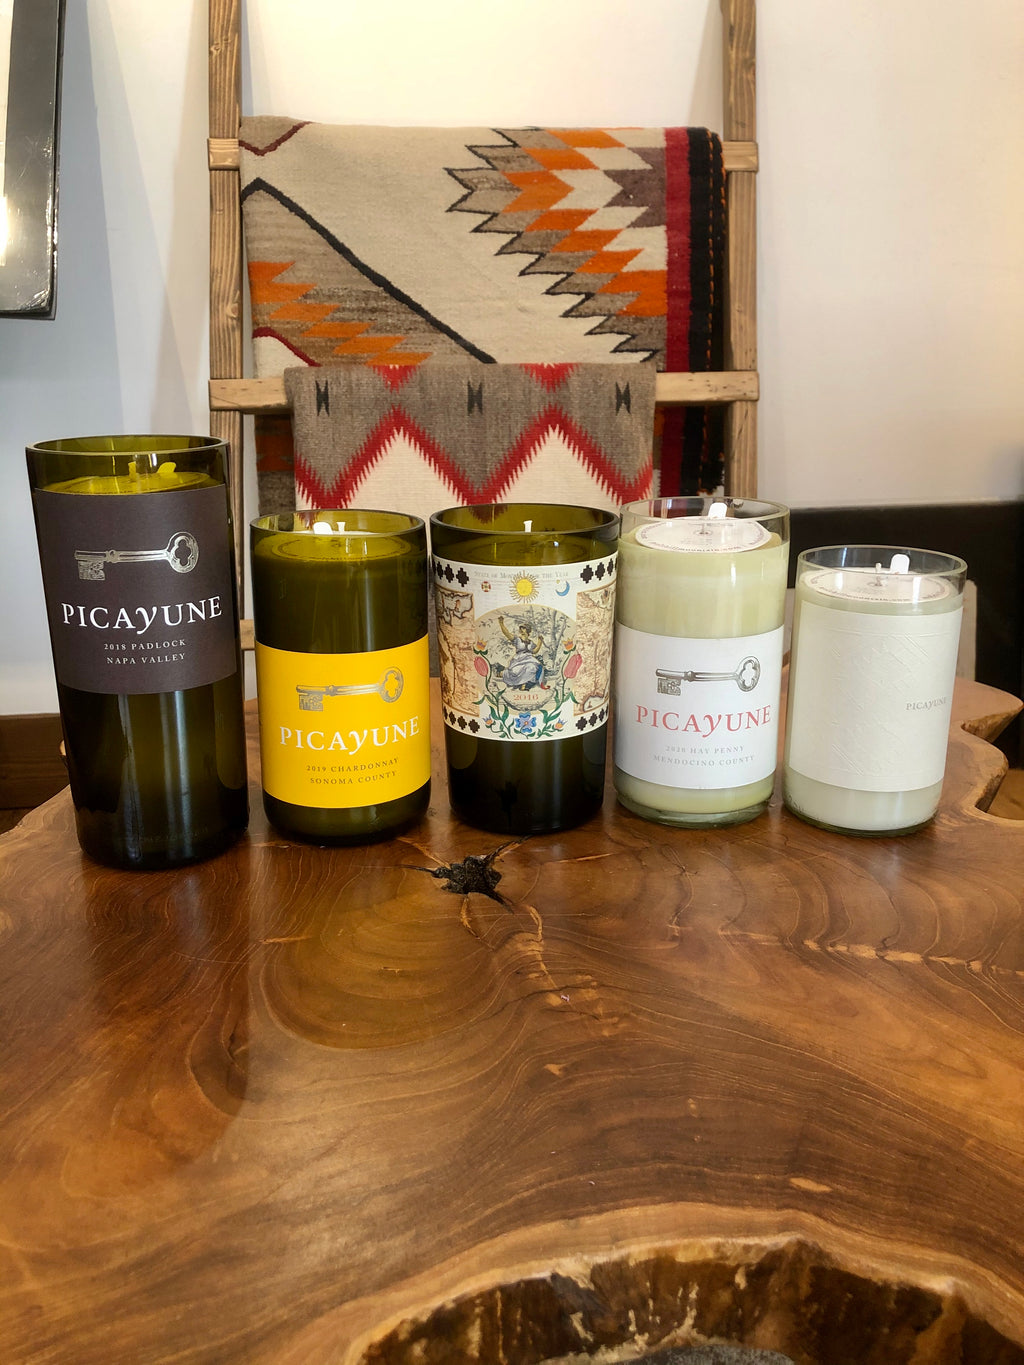 Centinelle Twilly – Picayune Cellars & Mercantile